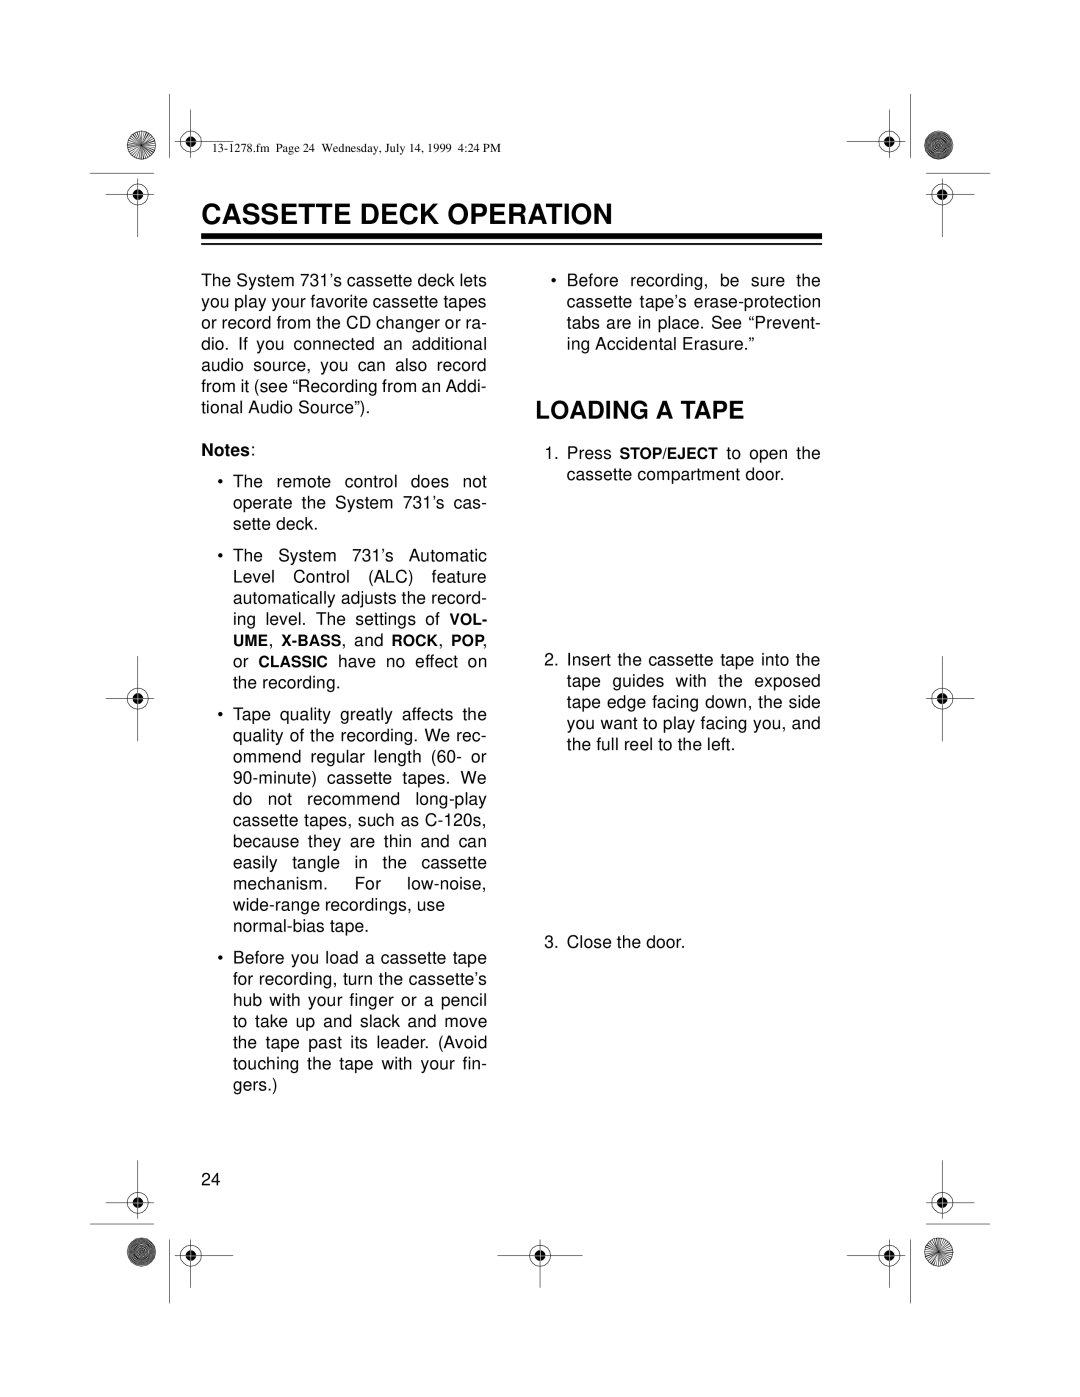 Optimus 731 owner manual Cassette Deck Operation, Loading A Tape 